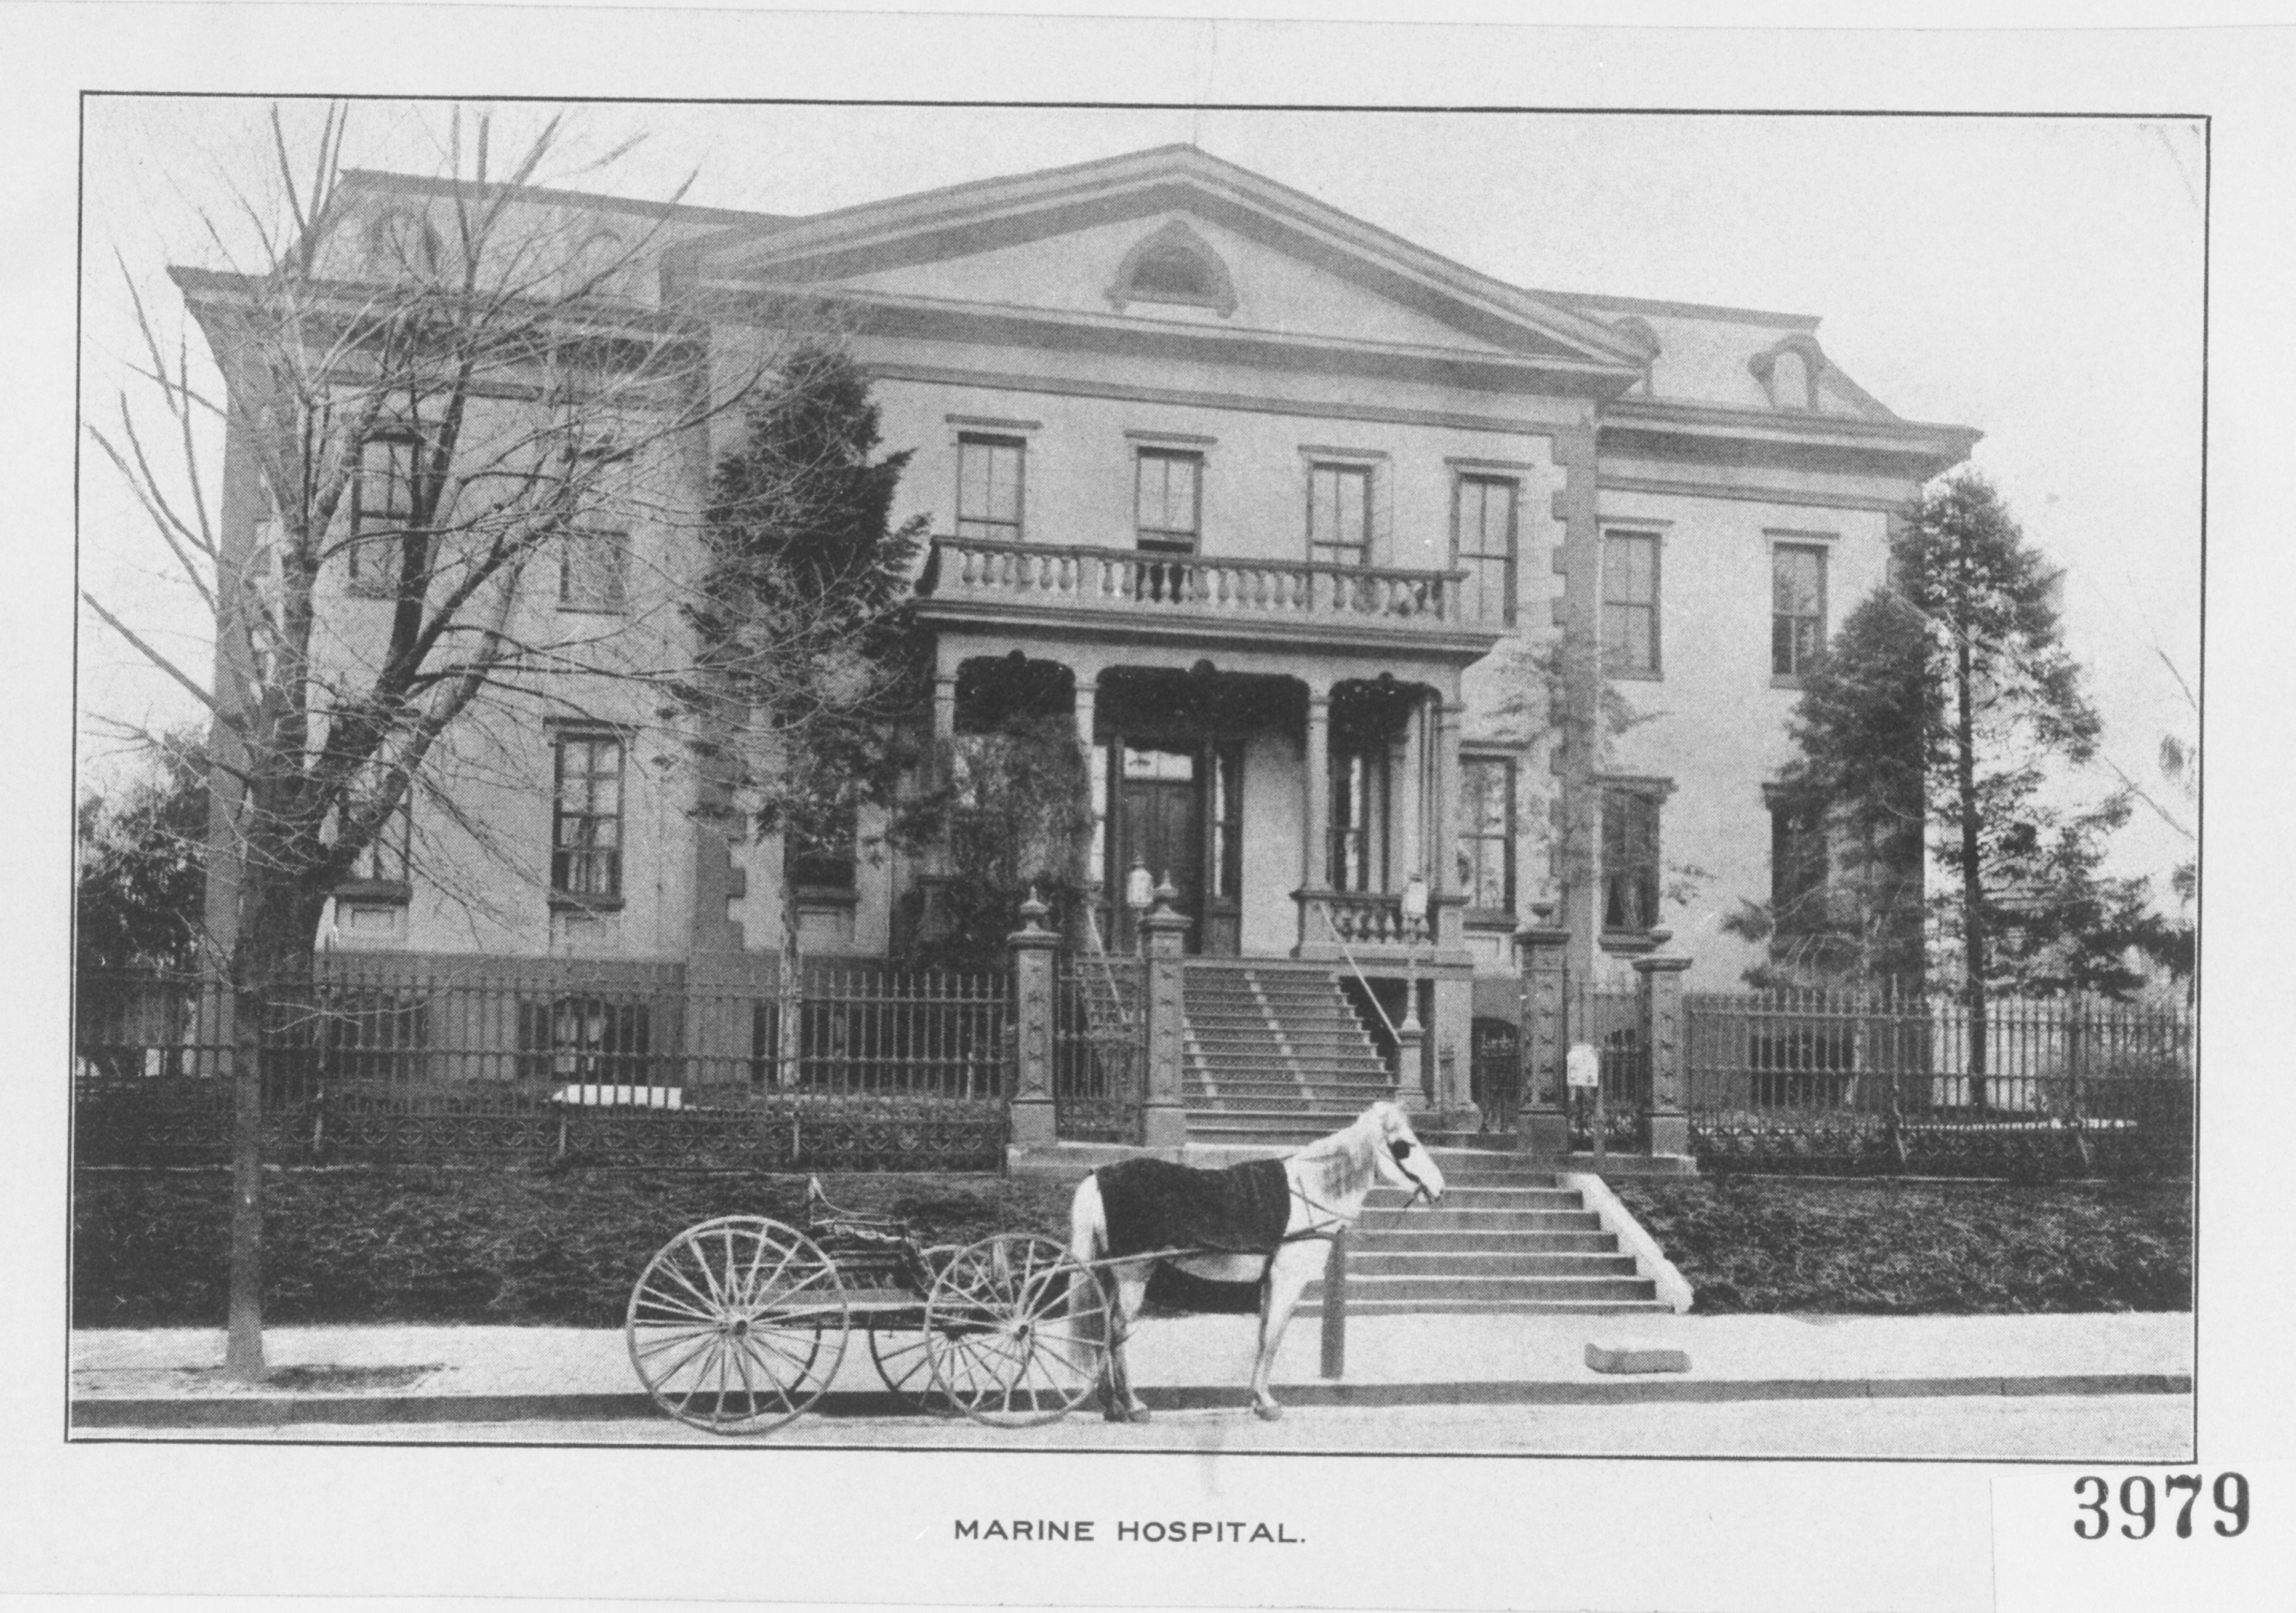 Circa 1900 - Horse-drawn carriage in front of the main entrance to the Naval Hospital, Washington City